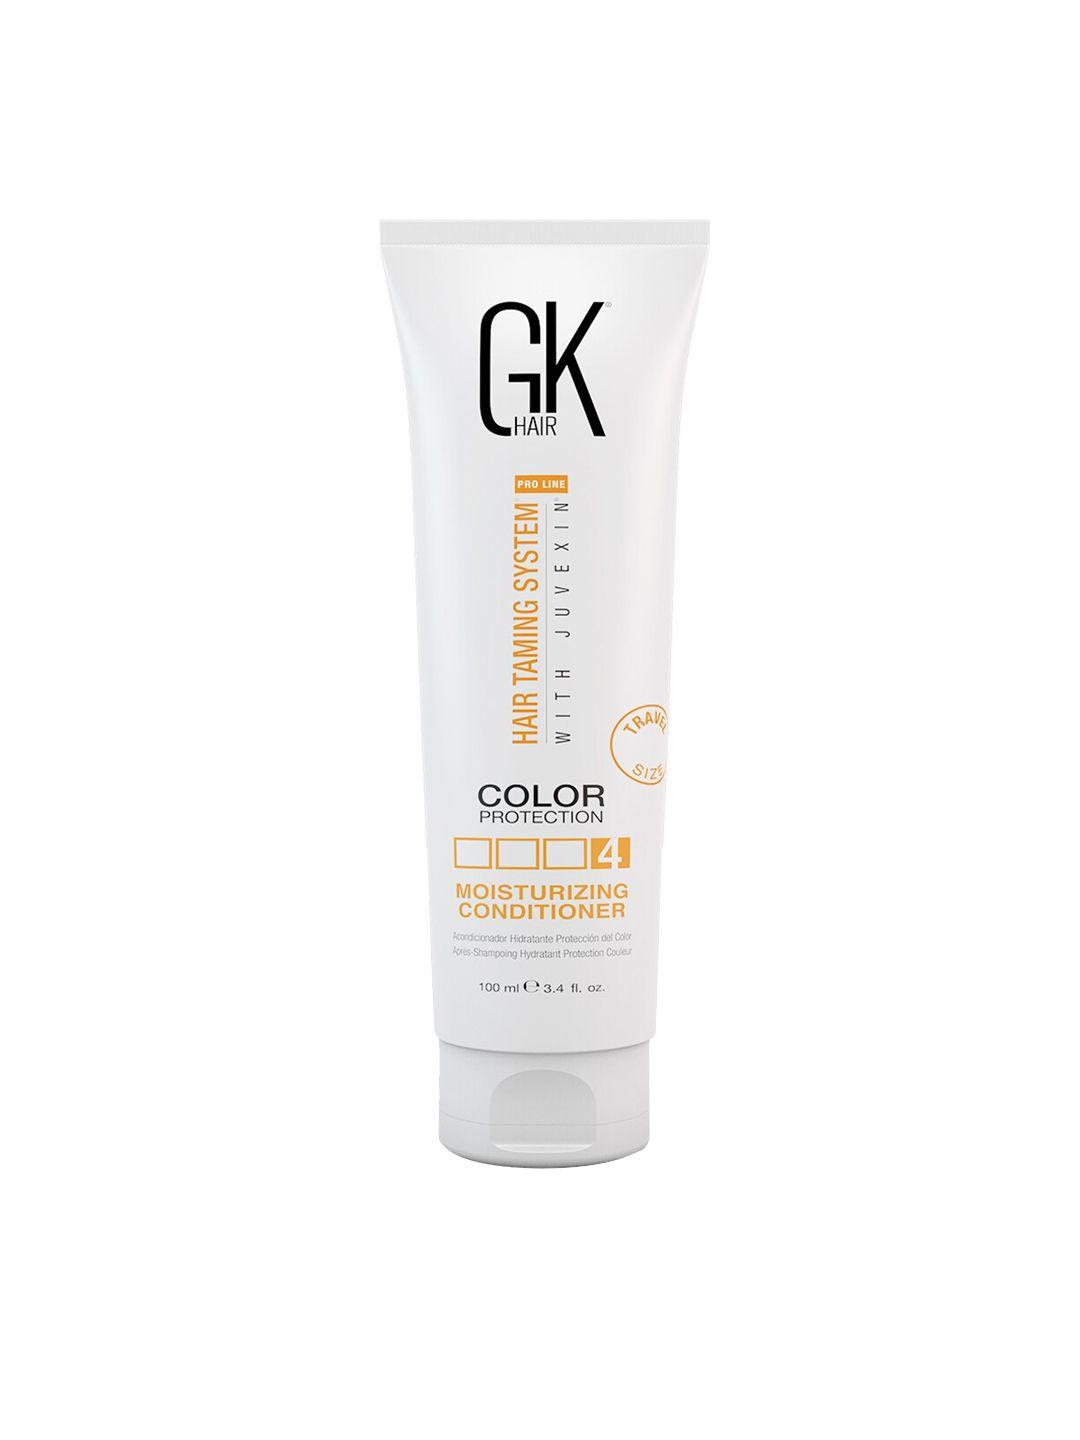 gk-hair-moisturizing-conditioner-for-color-protection---100ml